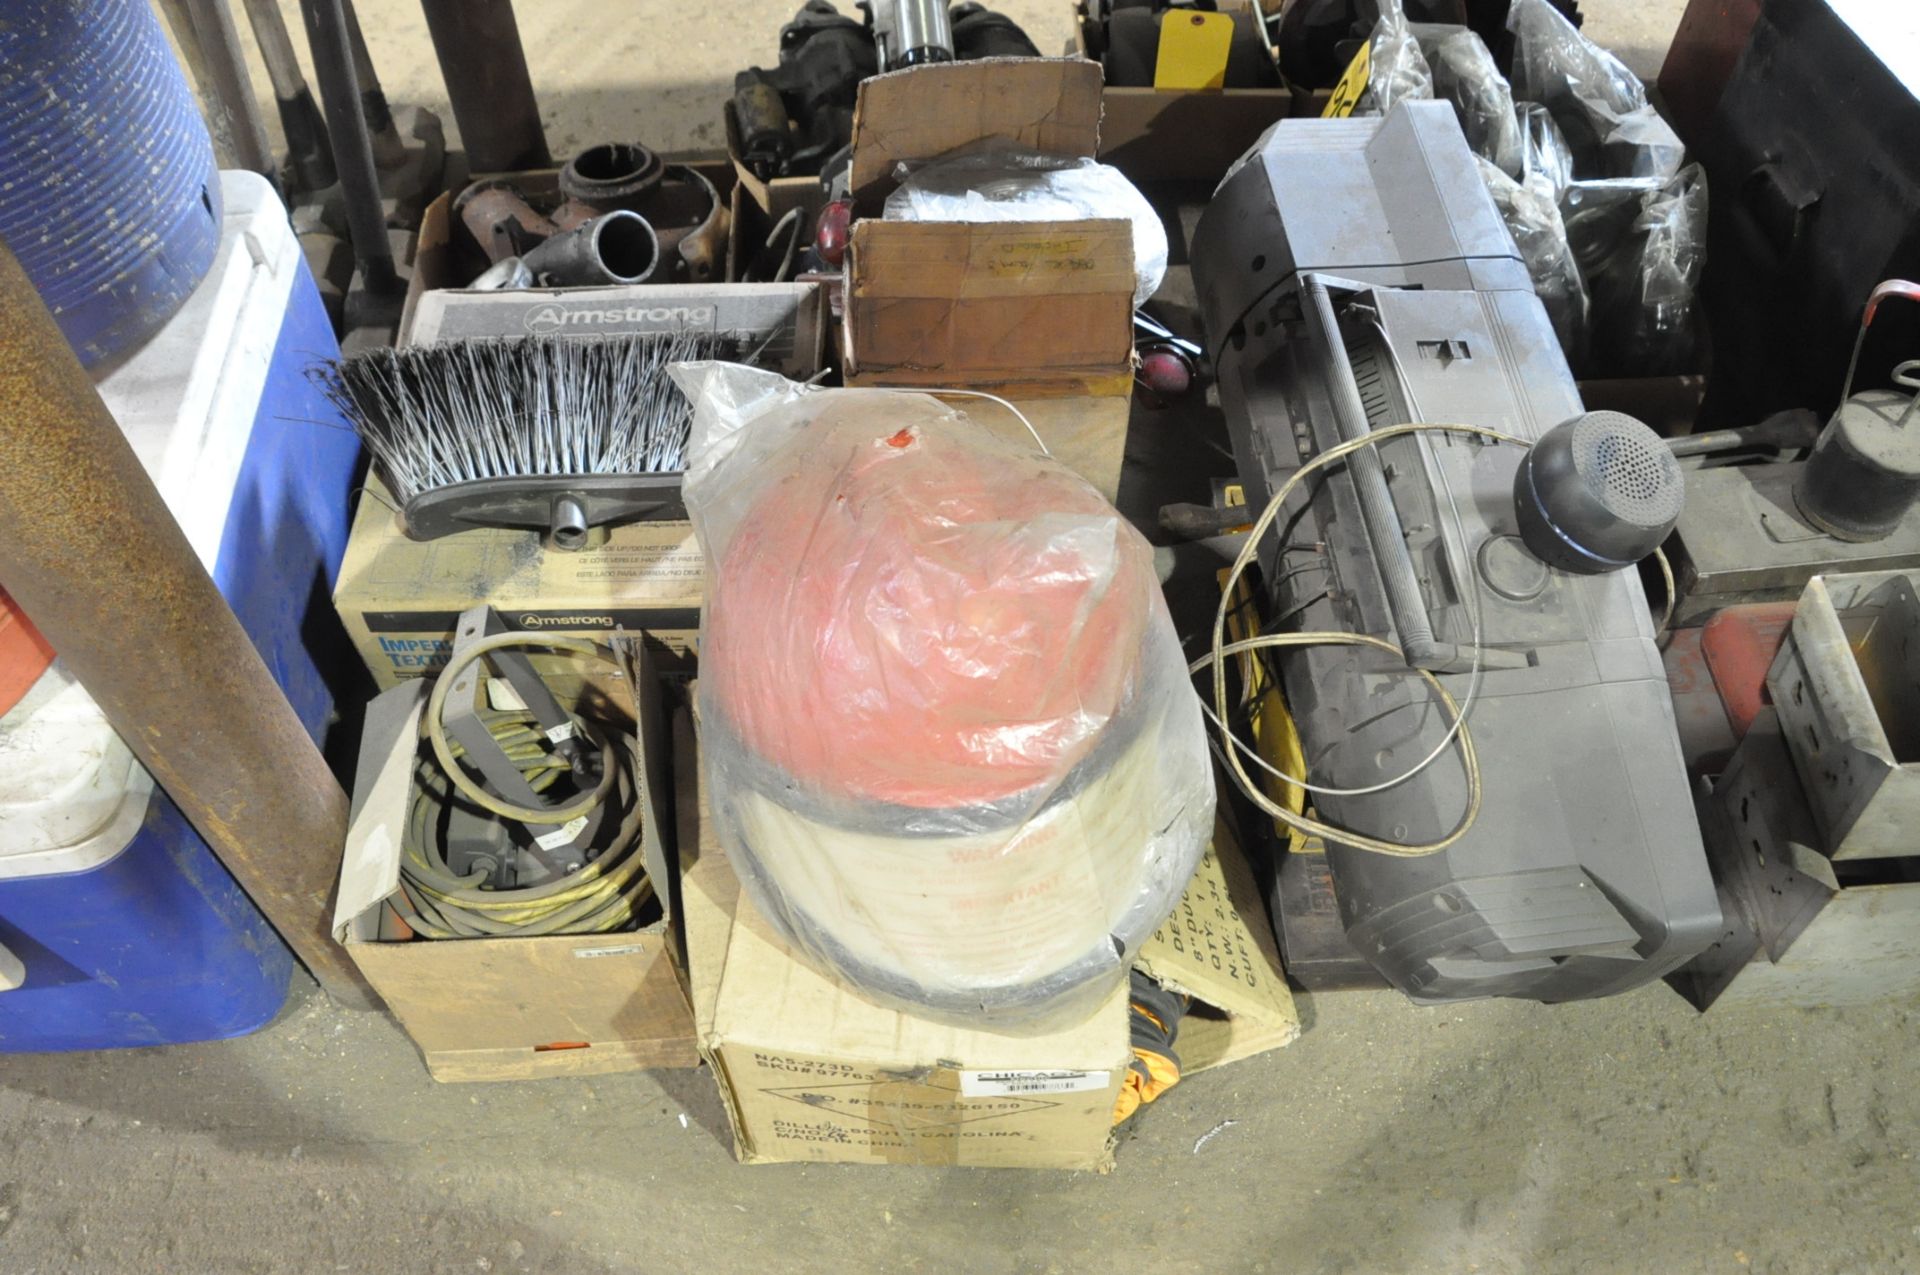 Lot-Pump Spray Cans, Magnet, Radio, 8" Flex Ducts, Bin Drawers, etc. on Floor Under (1) Side of - Image 4 of 5